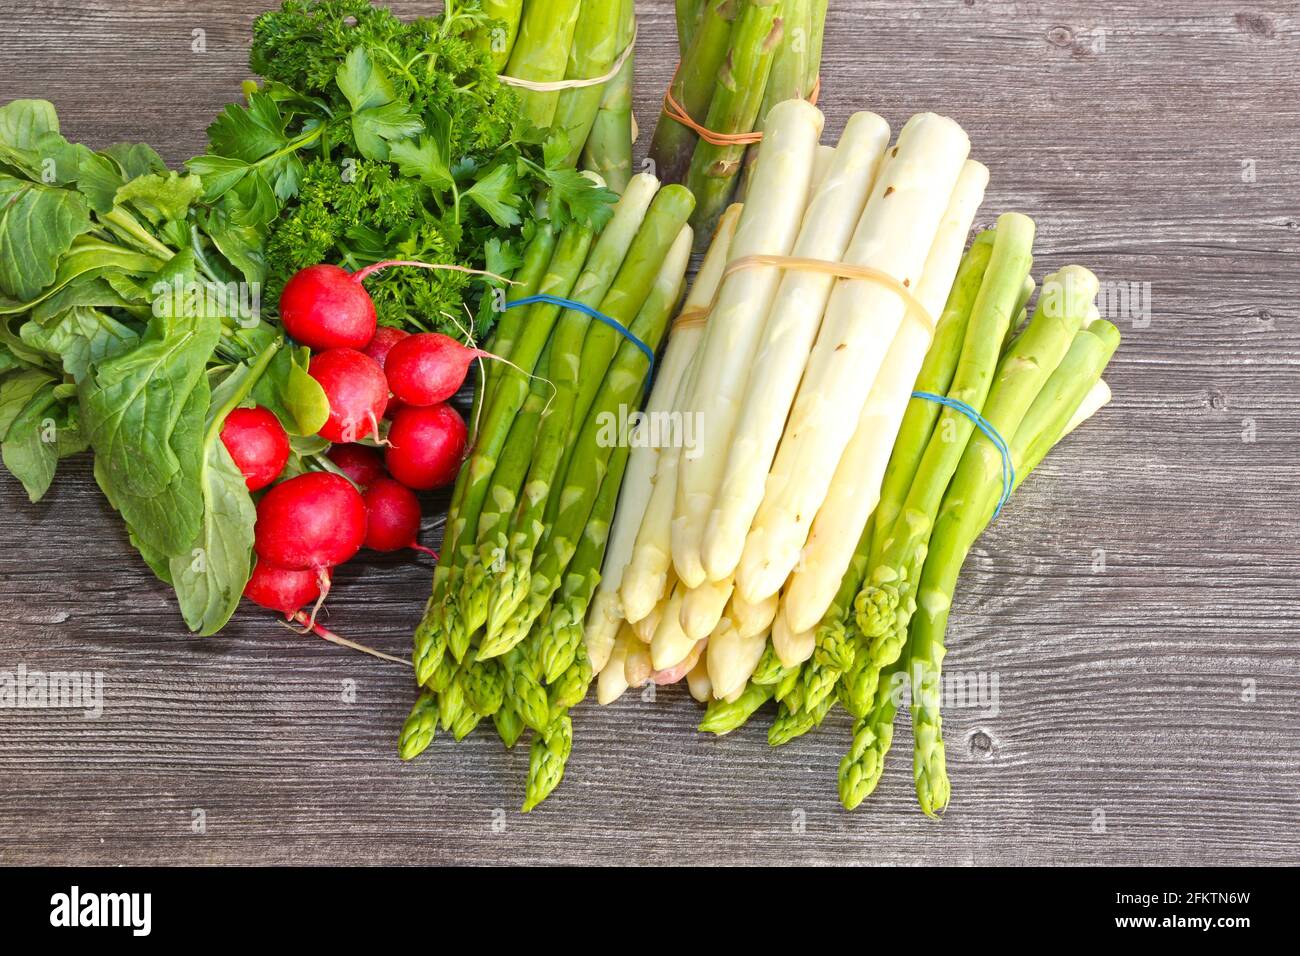 Green and white asparagus decorated on a rustic wooden table. Stock Photo